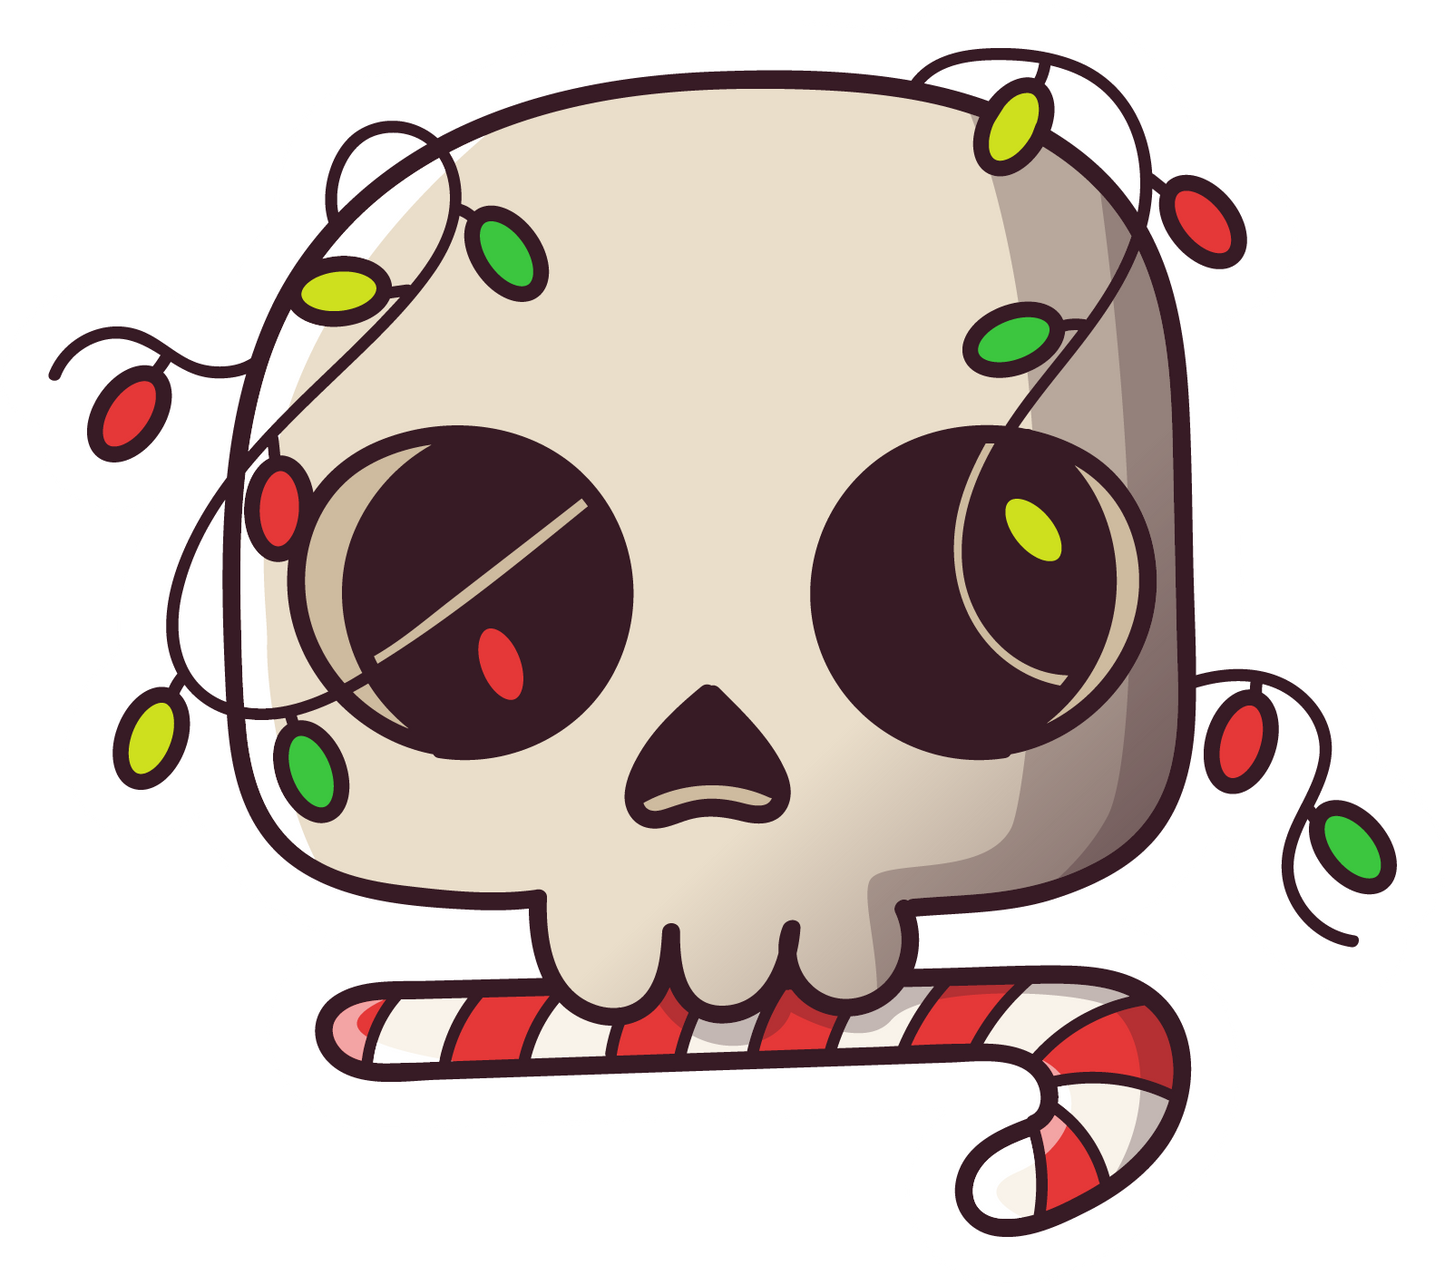 Stickers - Skull And Candy Cane And Christmas Lights Sticker, Christmas Stickers